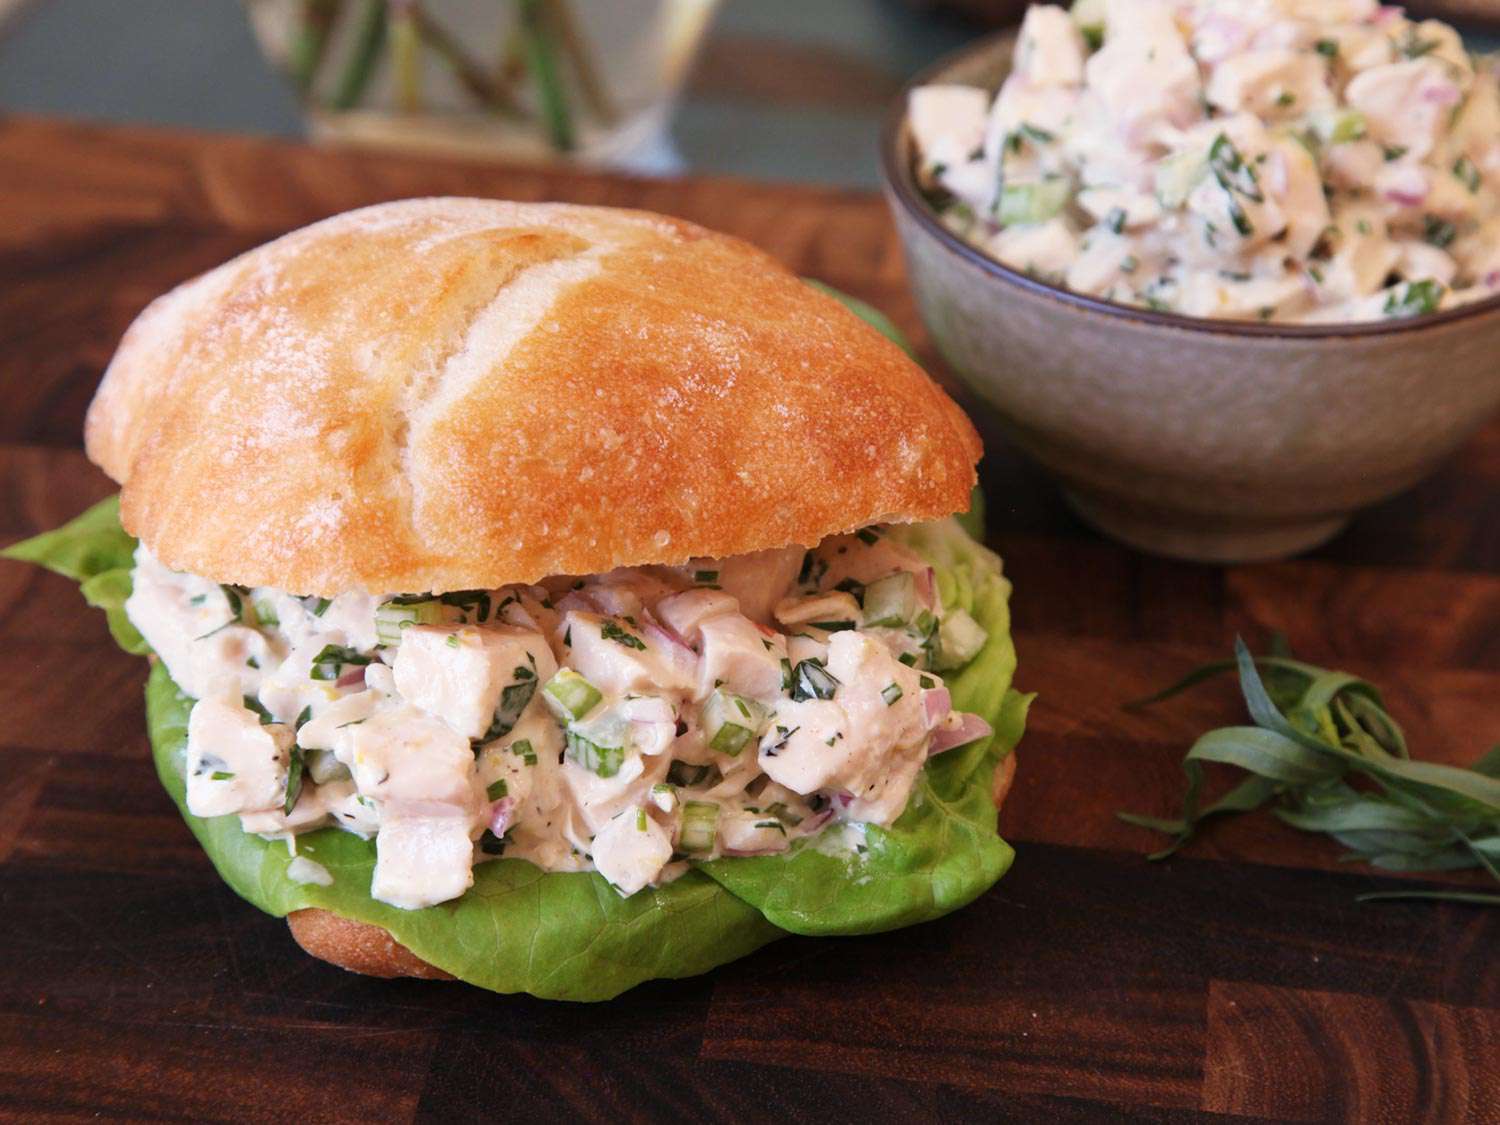 A sandwich roll stuffed with sous vide chicken salad on a bed of lettuce